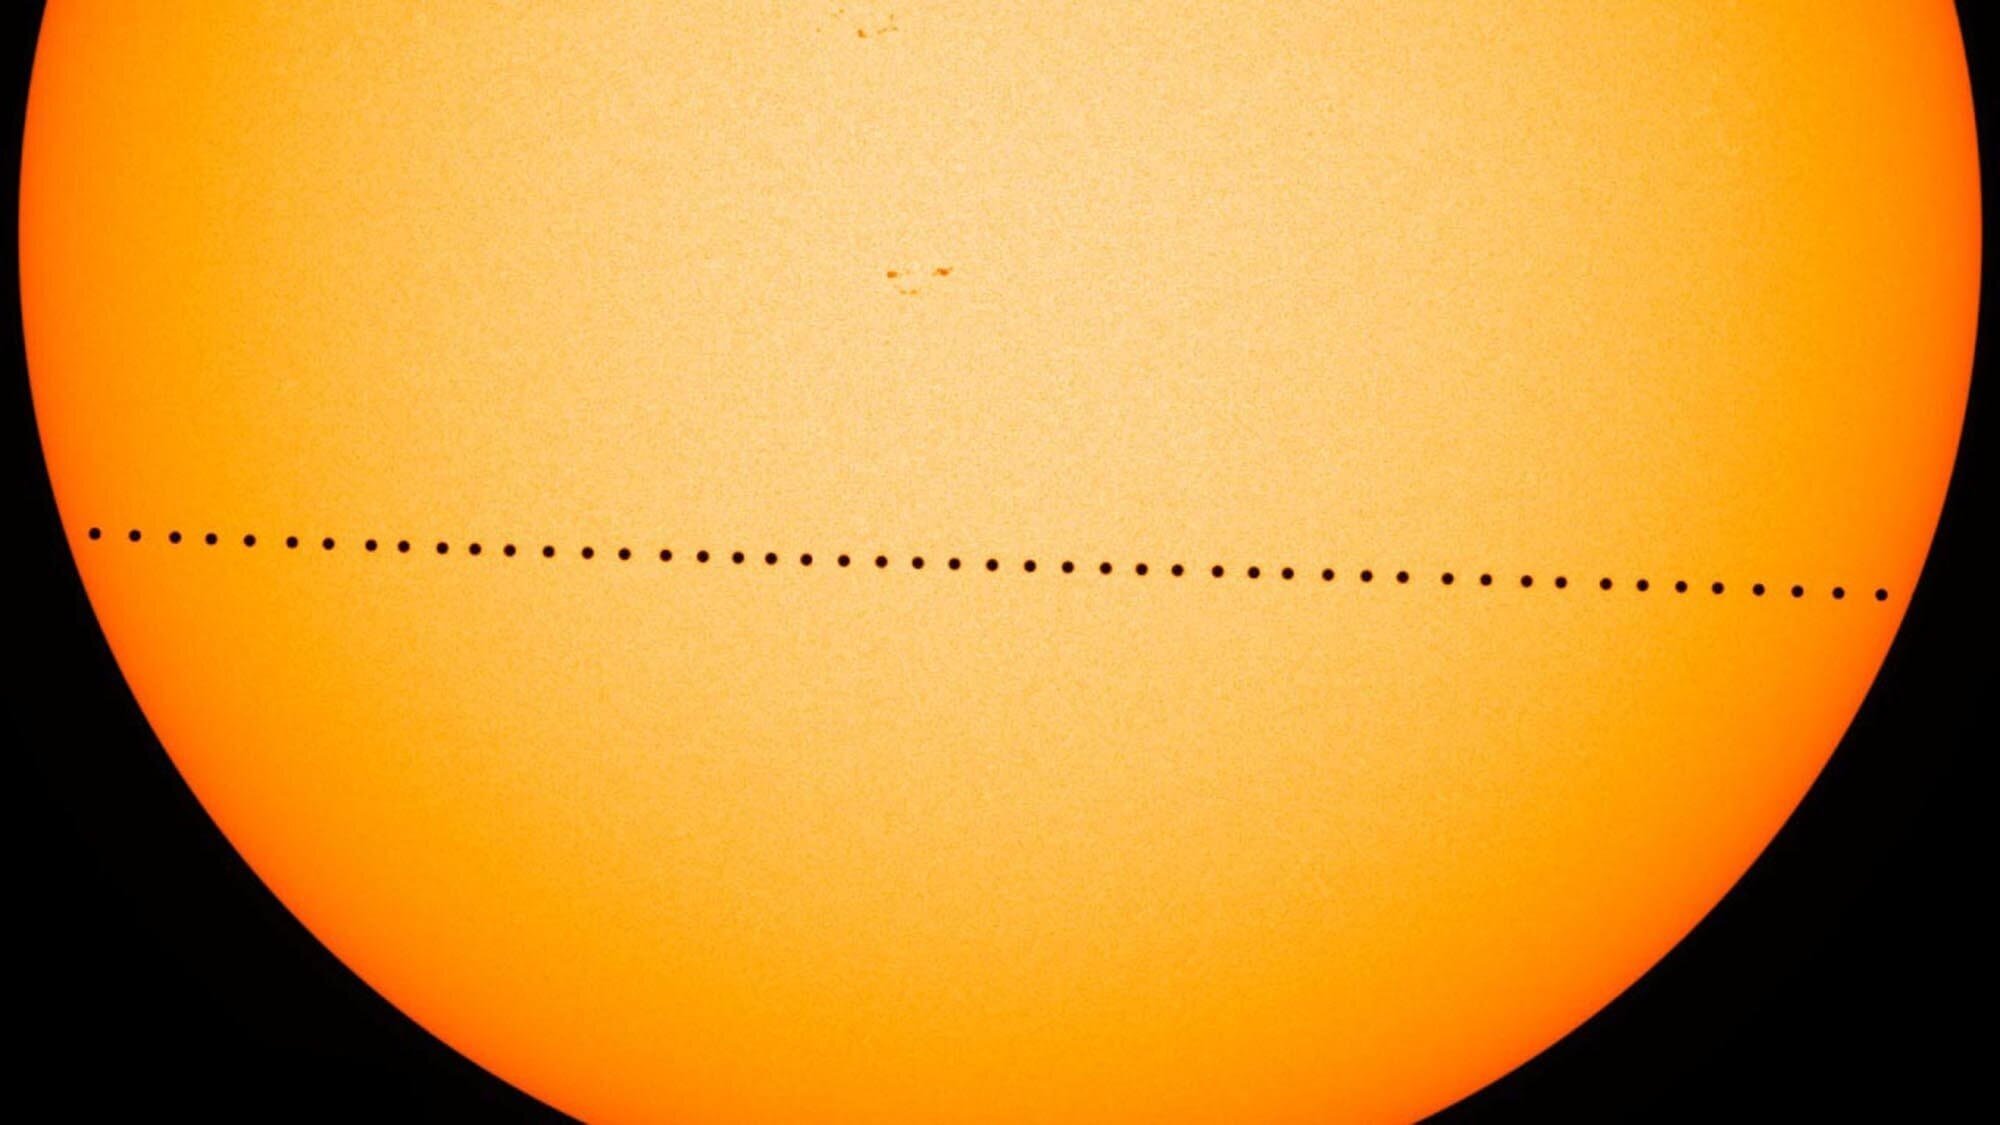 #Video | Everything you need to know about the transit of mercury over the solar disk